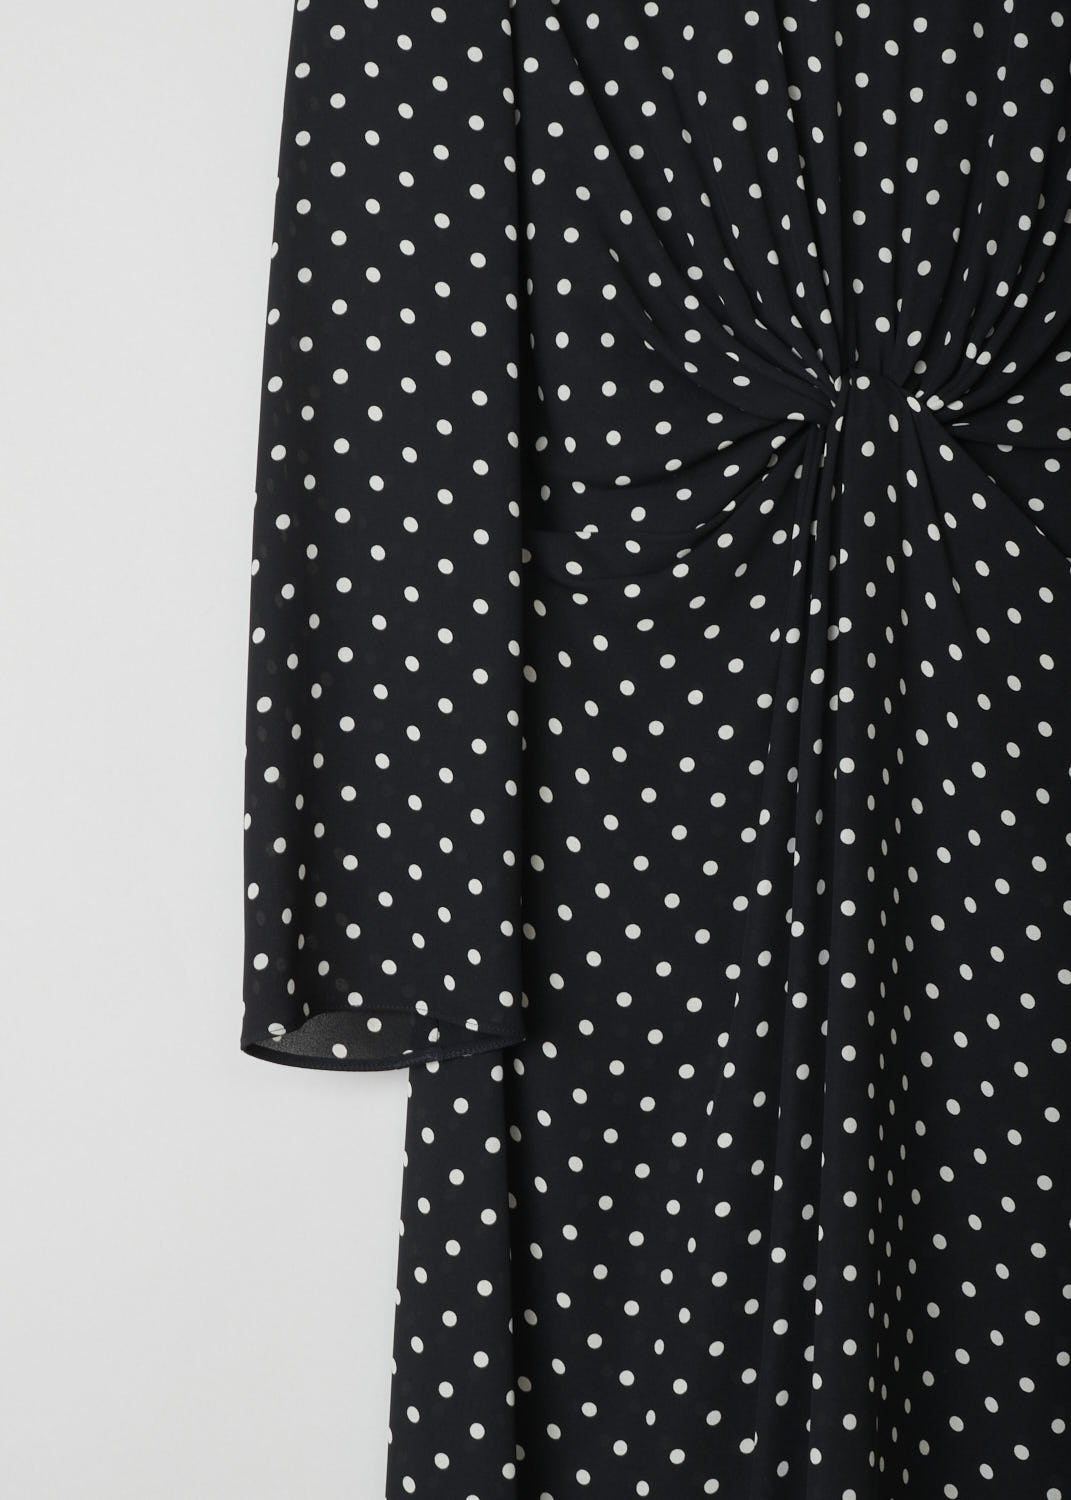 VALENTINO, SILK POLKA DOT MIDI DRESS, UB3VASO65LN_0NA, Black, Print, Detail 1, Beautiful silk dress in a classic black and white polka dot print. This dress has a high, rounded neckline and long sleeves. A concealed zipper can be found on the back. What makes this dress stand out, is the elegant knotted detail across the front. 
